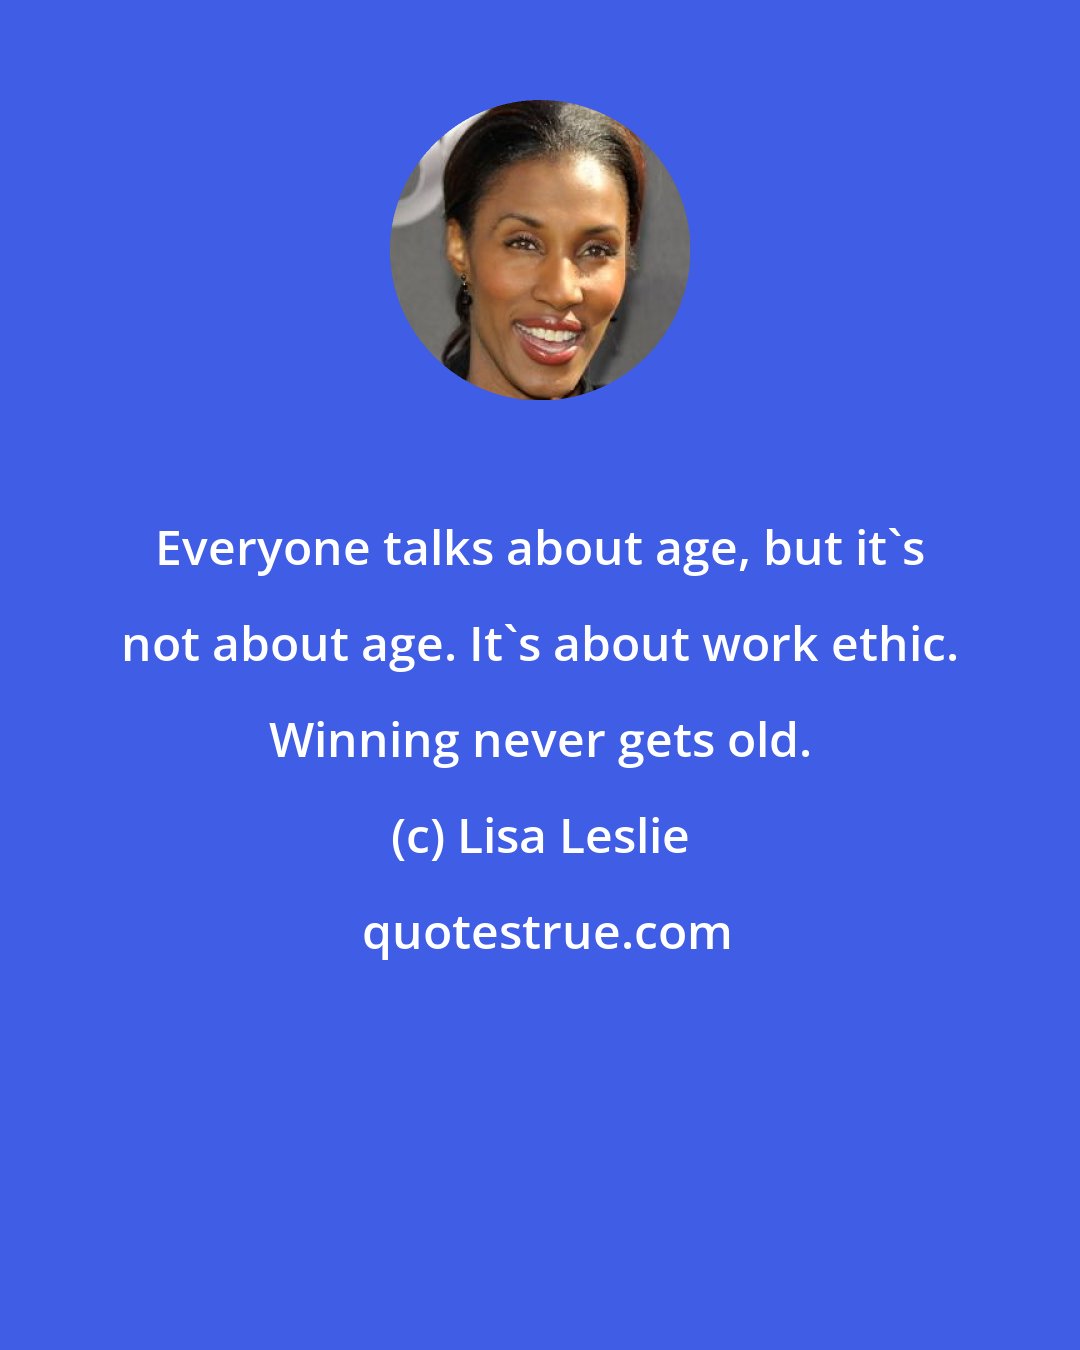 Lisa Leslie: Everyone talks about age, but it's not about age. It's about work ethic. Winning never gets old.